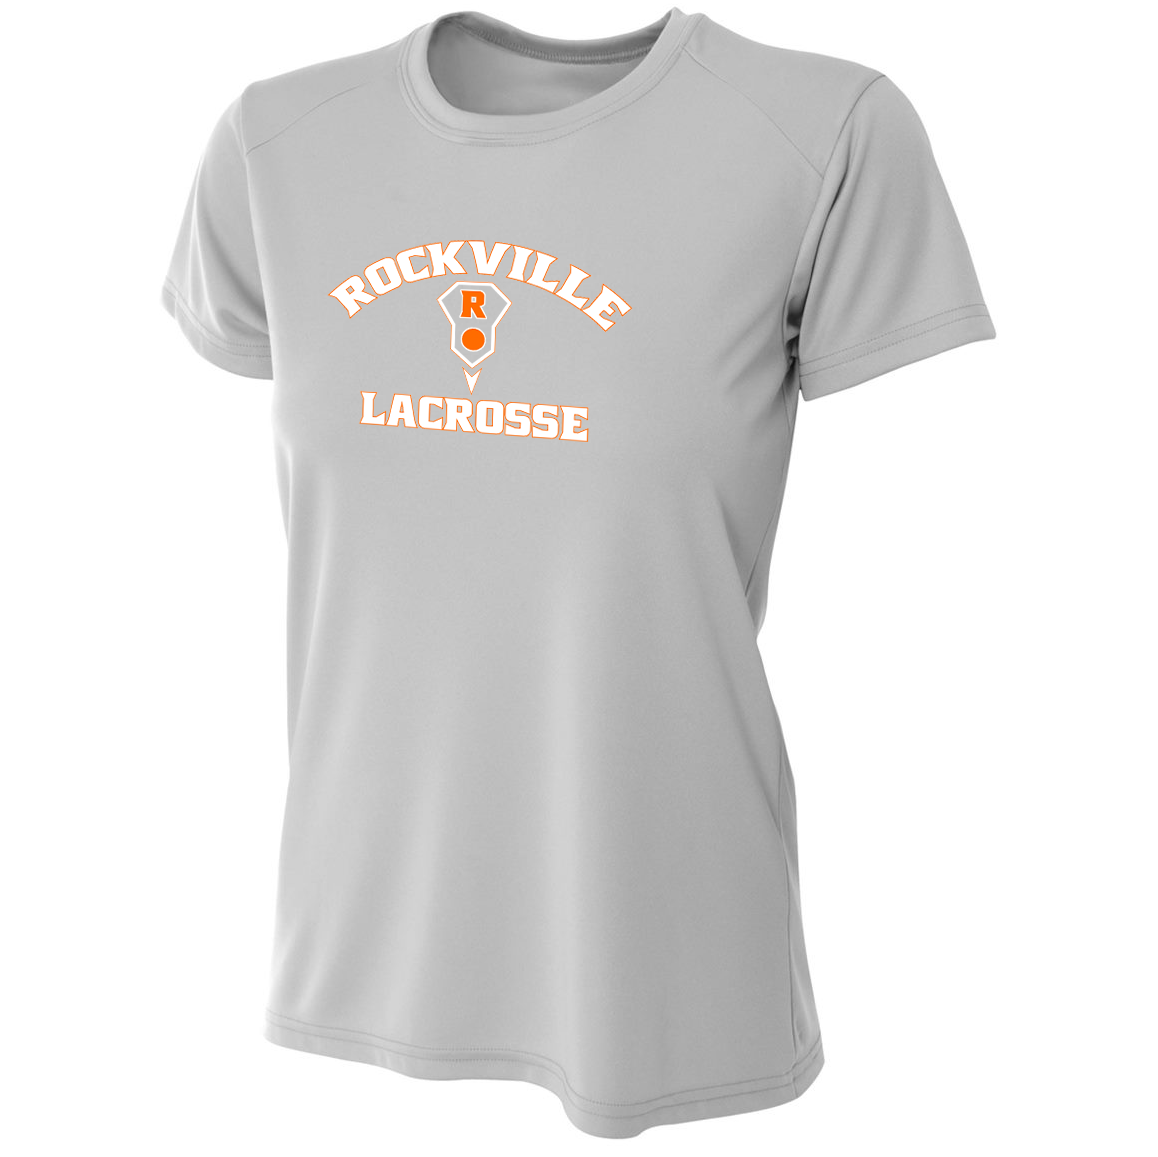 Rockville HS Girls Lacrosse A4 Womens Cooling Performance Crew